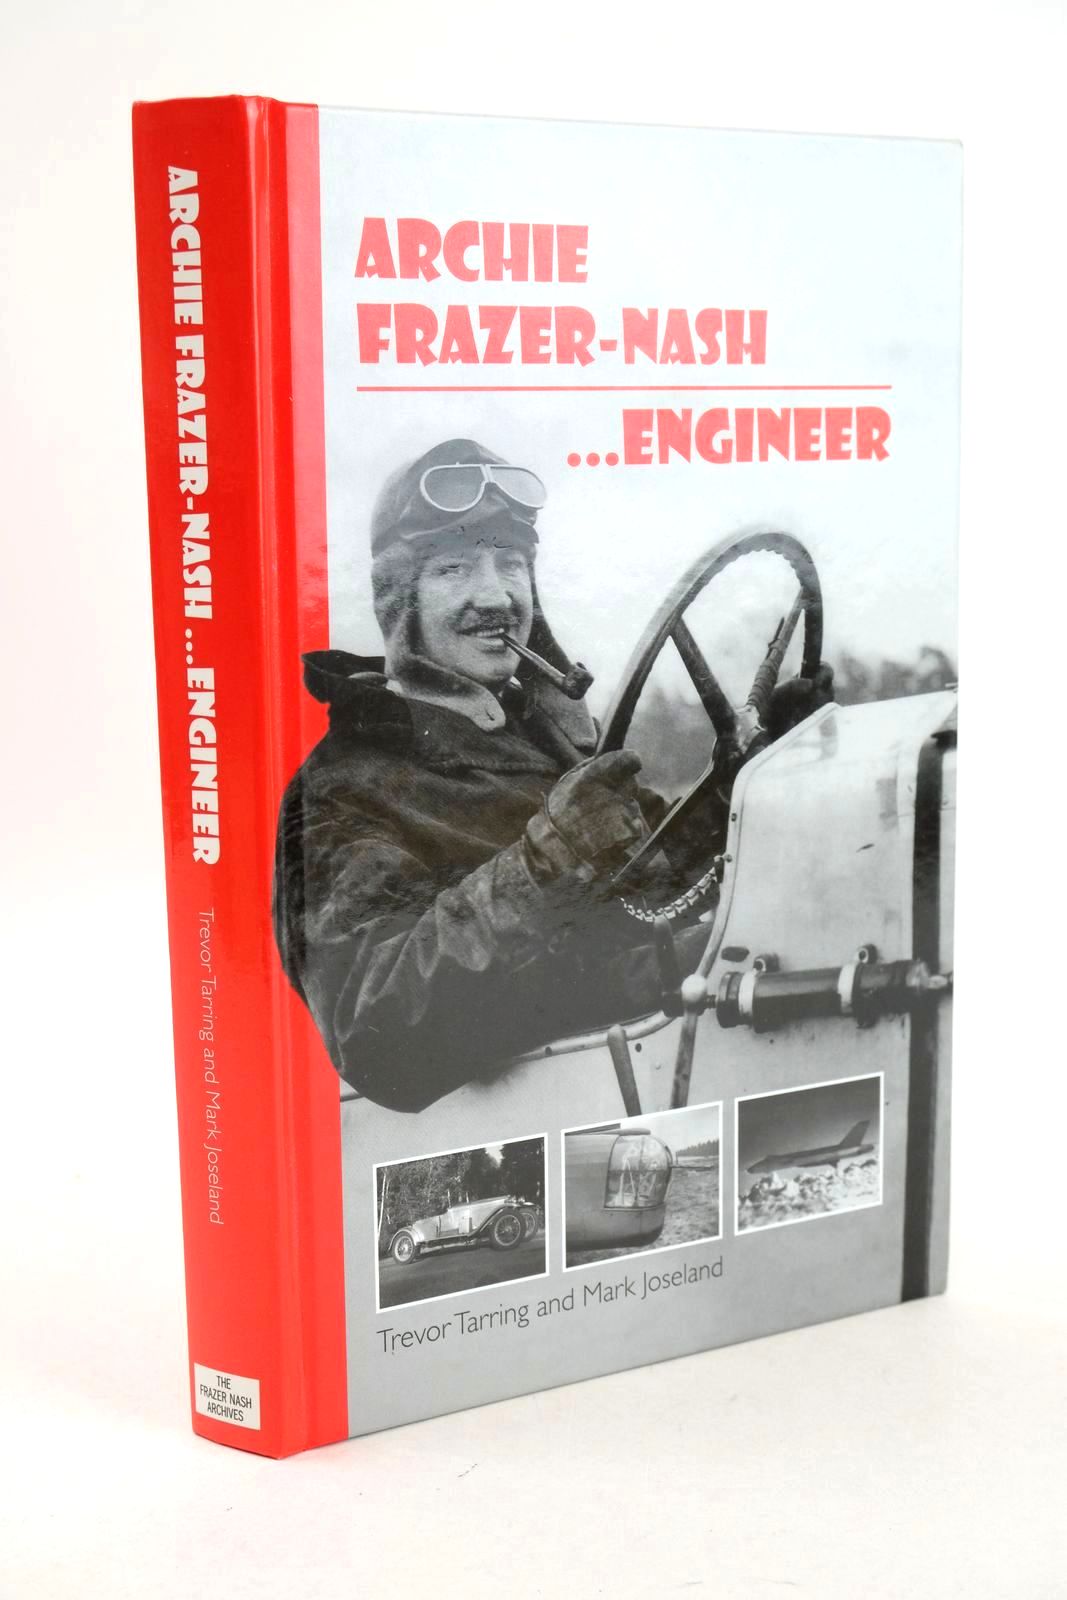 Photo of ARCHIE FRAZER-NASH, ENGINEER written by Tarring, Trevor Joseland, Mark published by The Frazer Nash Archives (STOCK CODE: 1326572)  for sale by Stella & Rose's Books